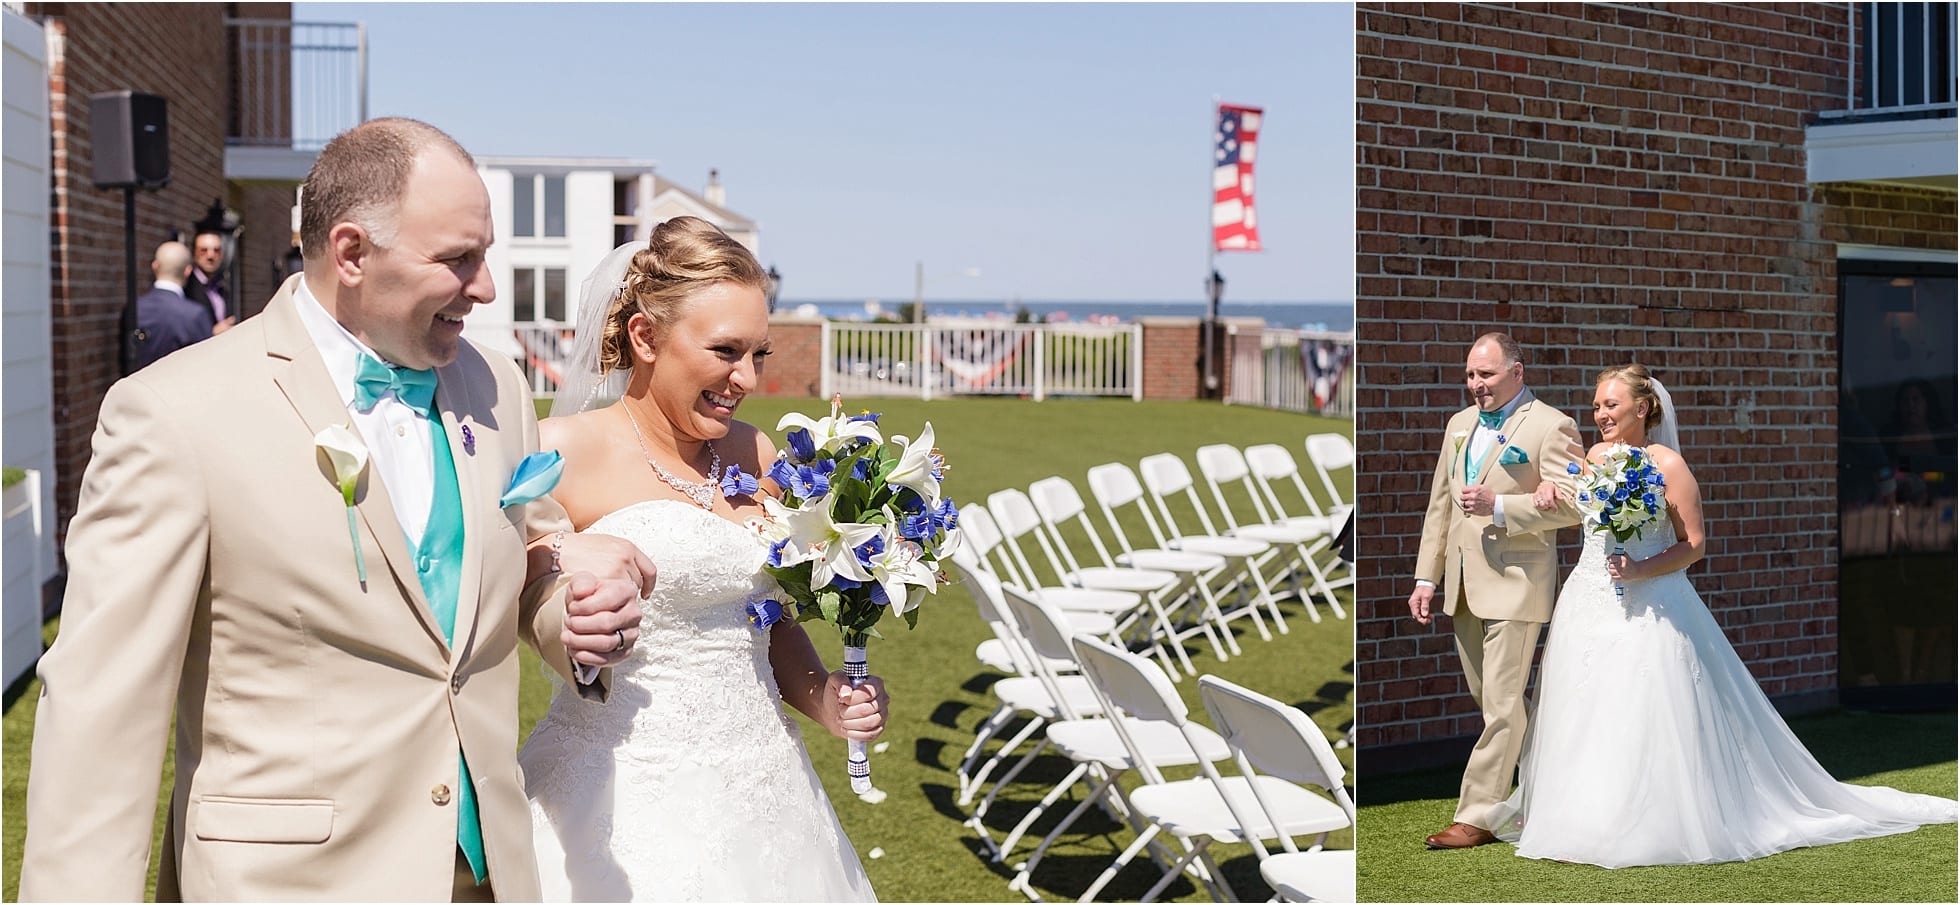 Cape May Beach Wedding At The Grand Hotel 6 Greater Philadelphia Wedding Photography Videography Team